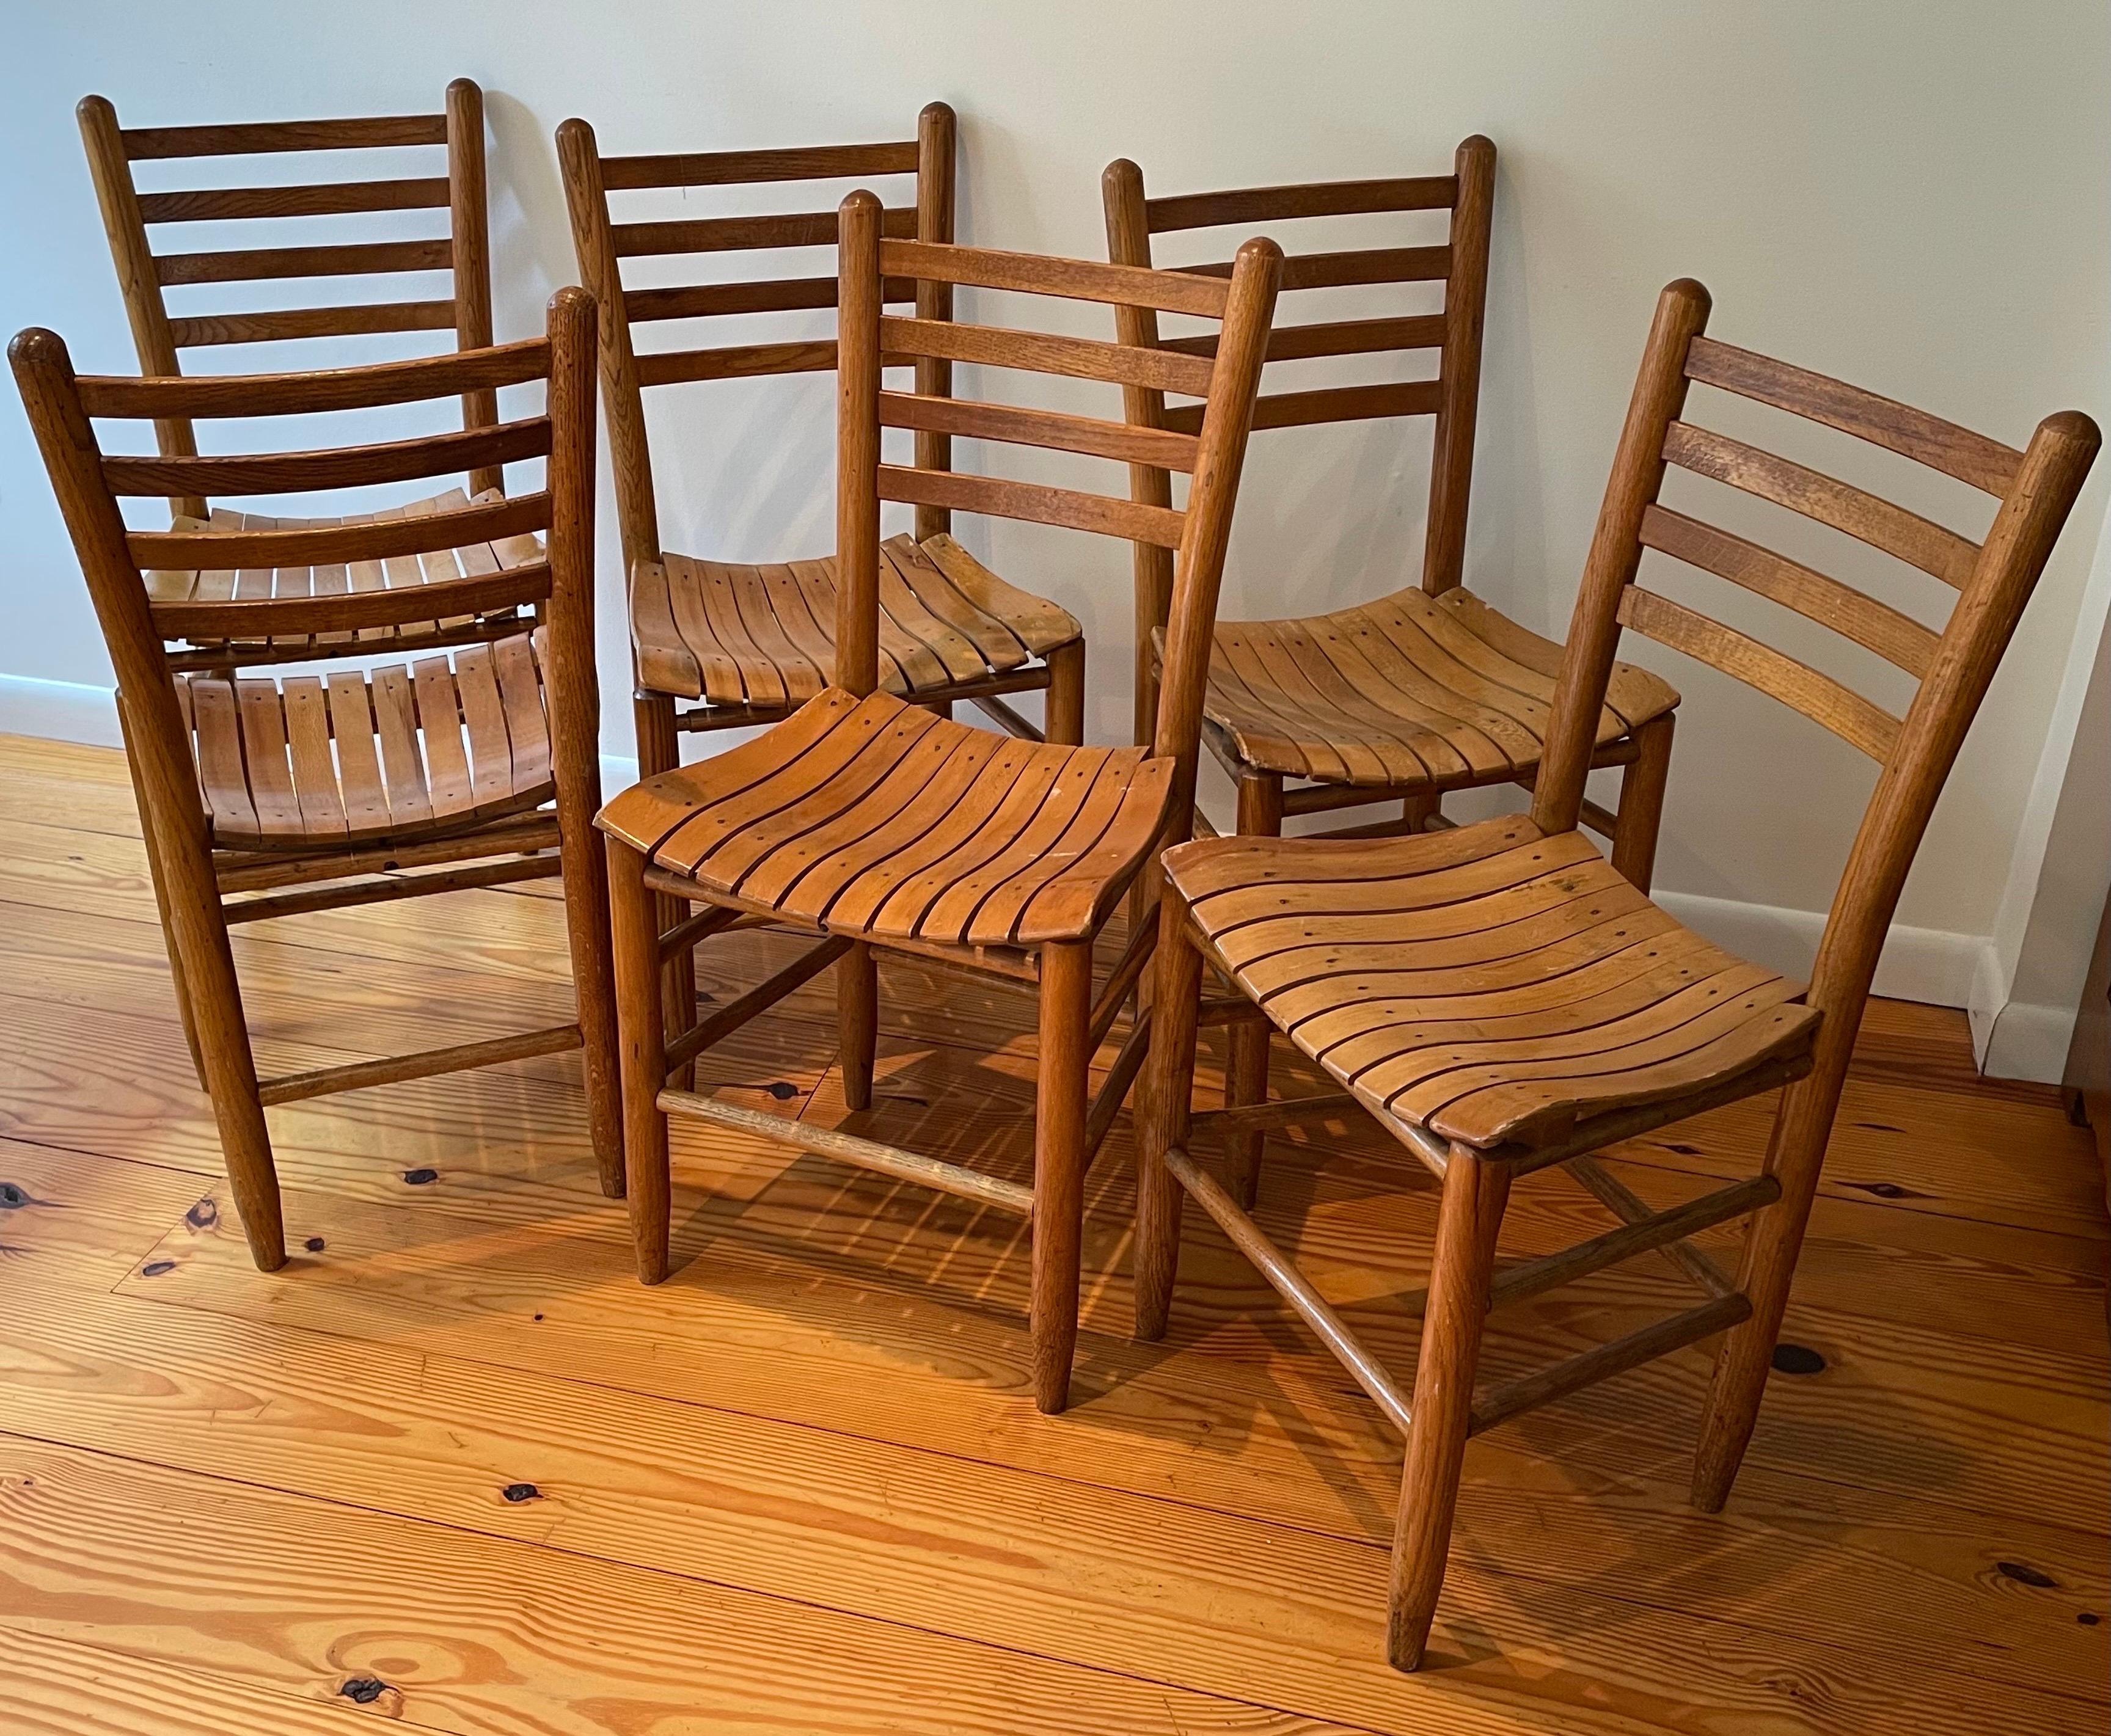 Rustic Set of Six Ladder Back Oak Country Dining Chairs, Bentwood Seats, North Carolina